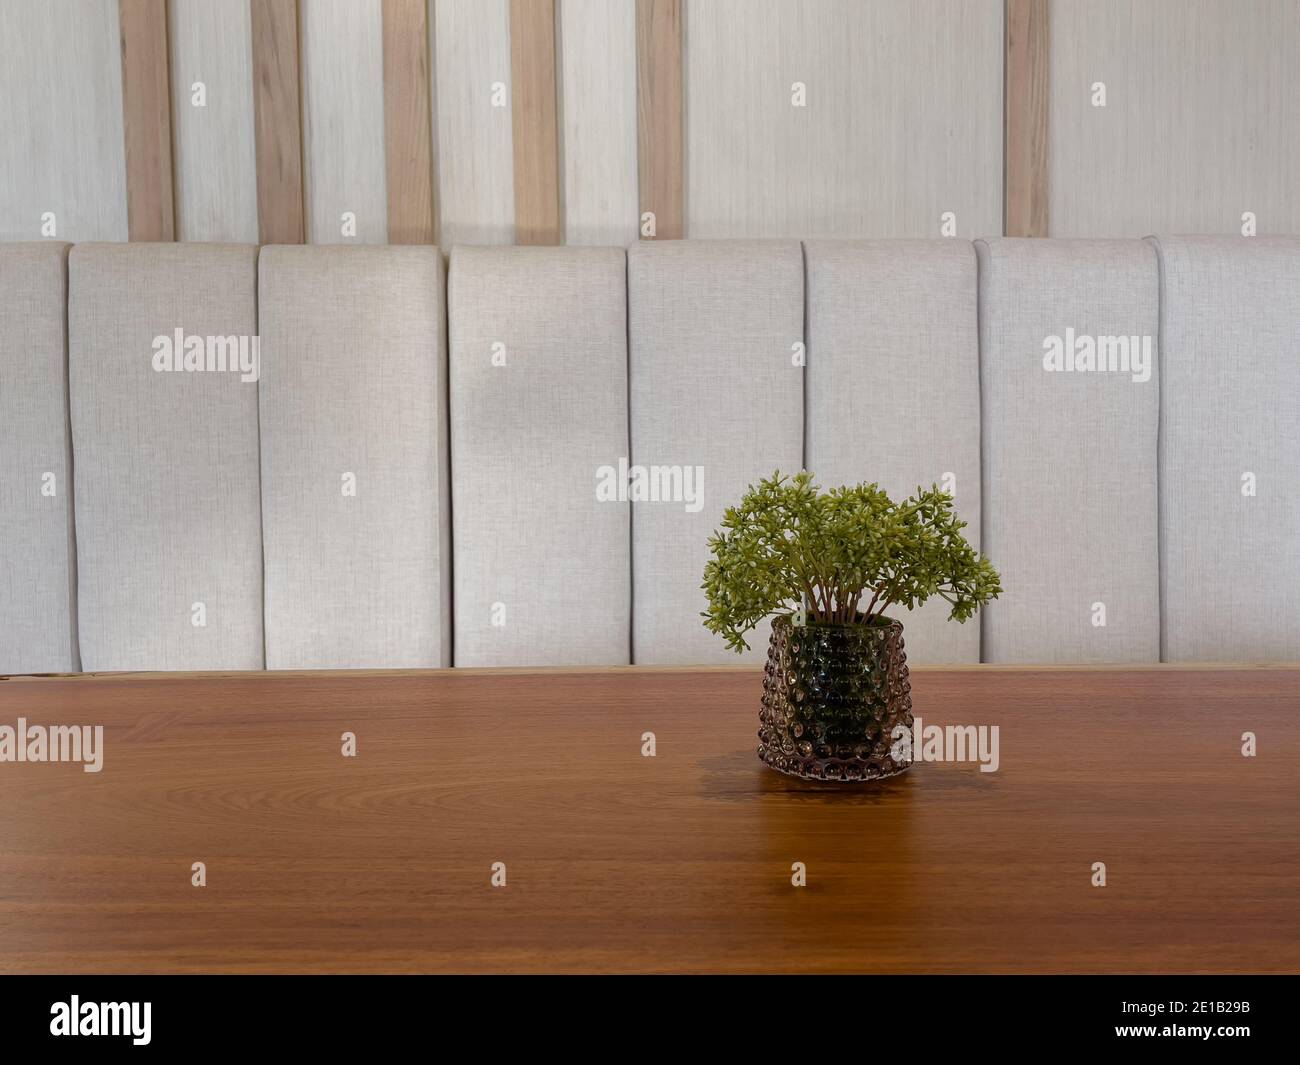 Table of free space with green plant, stock photo Stock Photo